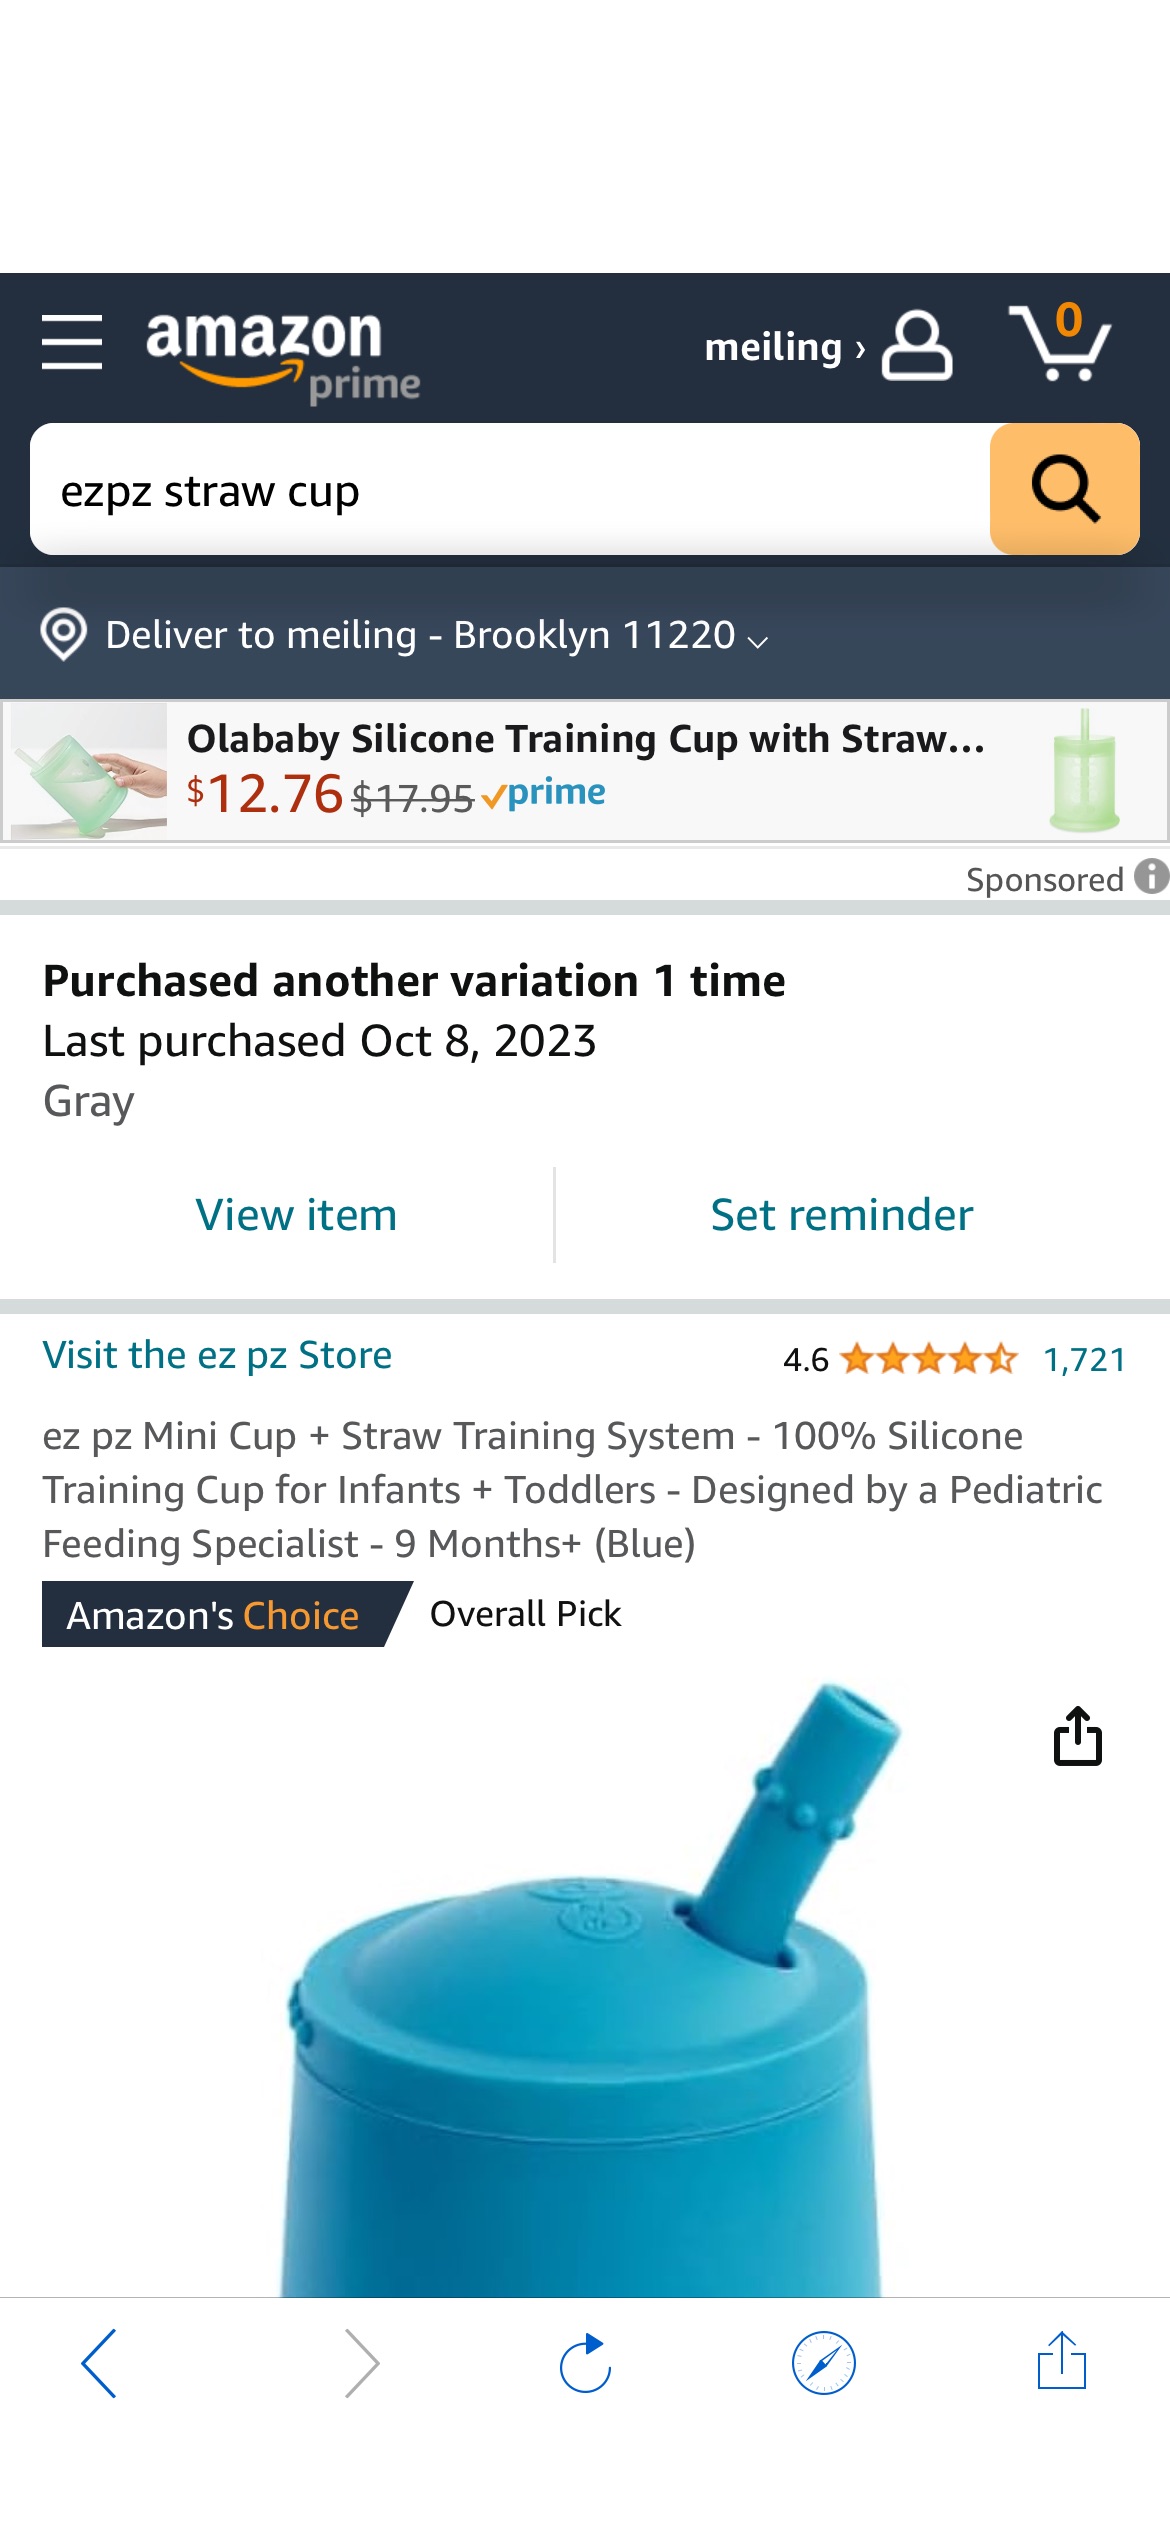 Amazon.com: ez pz Mini Cup + Straw Training System - 100% Silicone Training Cup for Infants + Toddlers - Designed by a Pediatric Feeding Specialist - 9 Months+ (Blue) : Baby